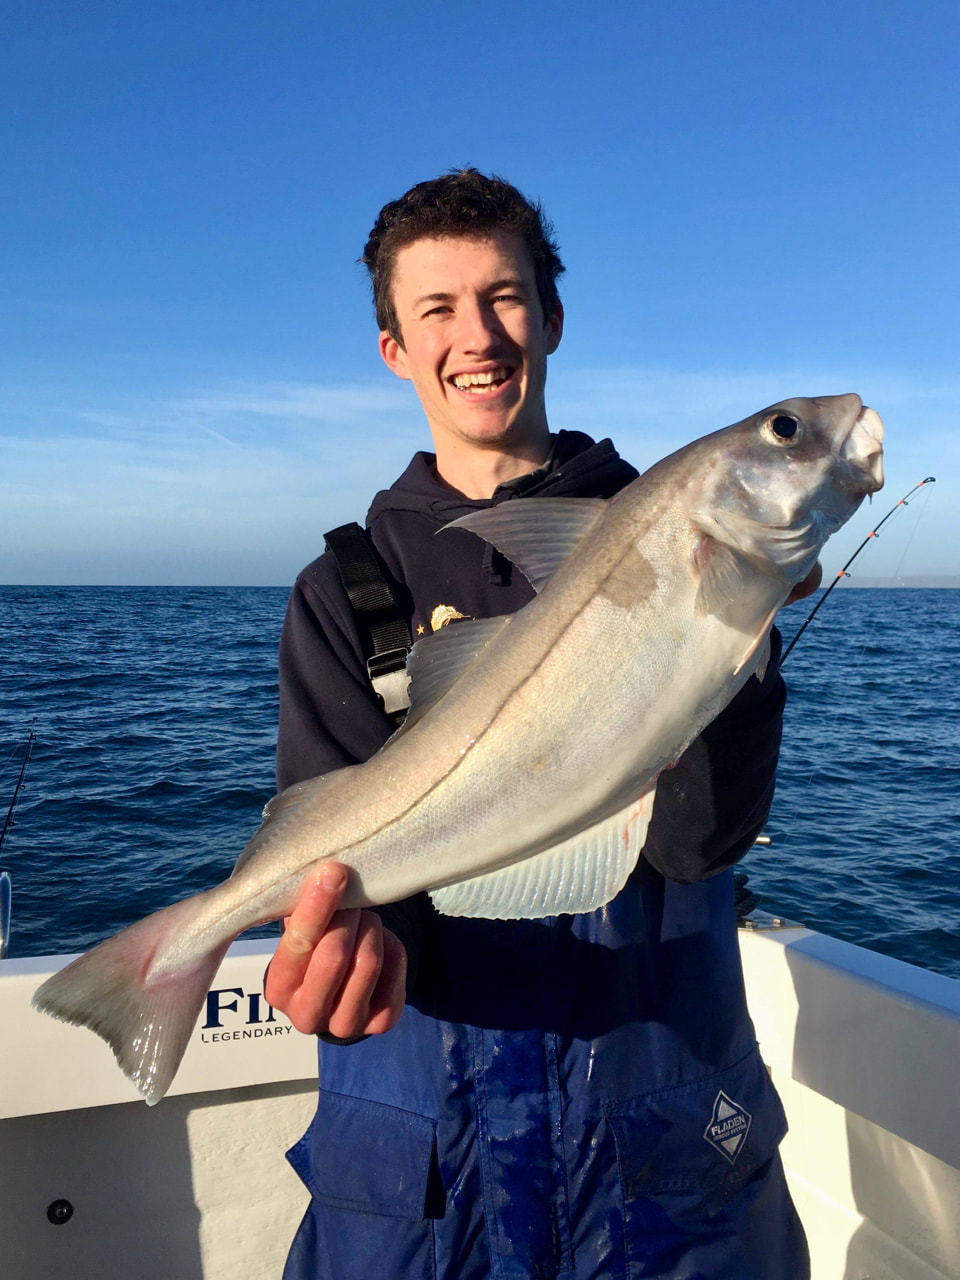 Liam with a 5lb 10oz Haddock caught on Bite Adventures Fishing trips